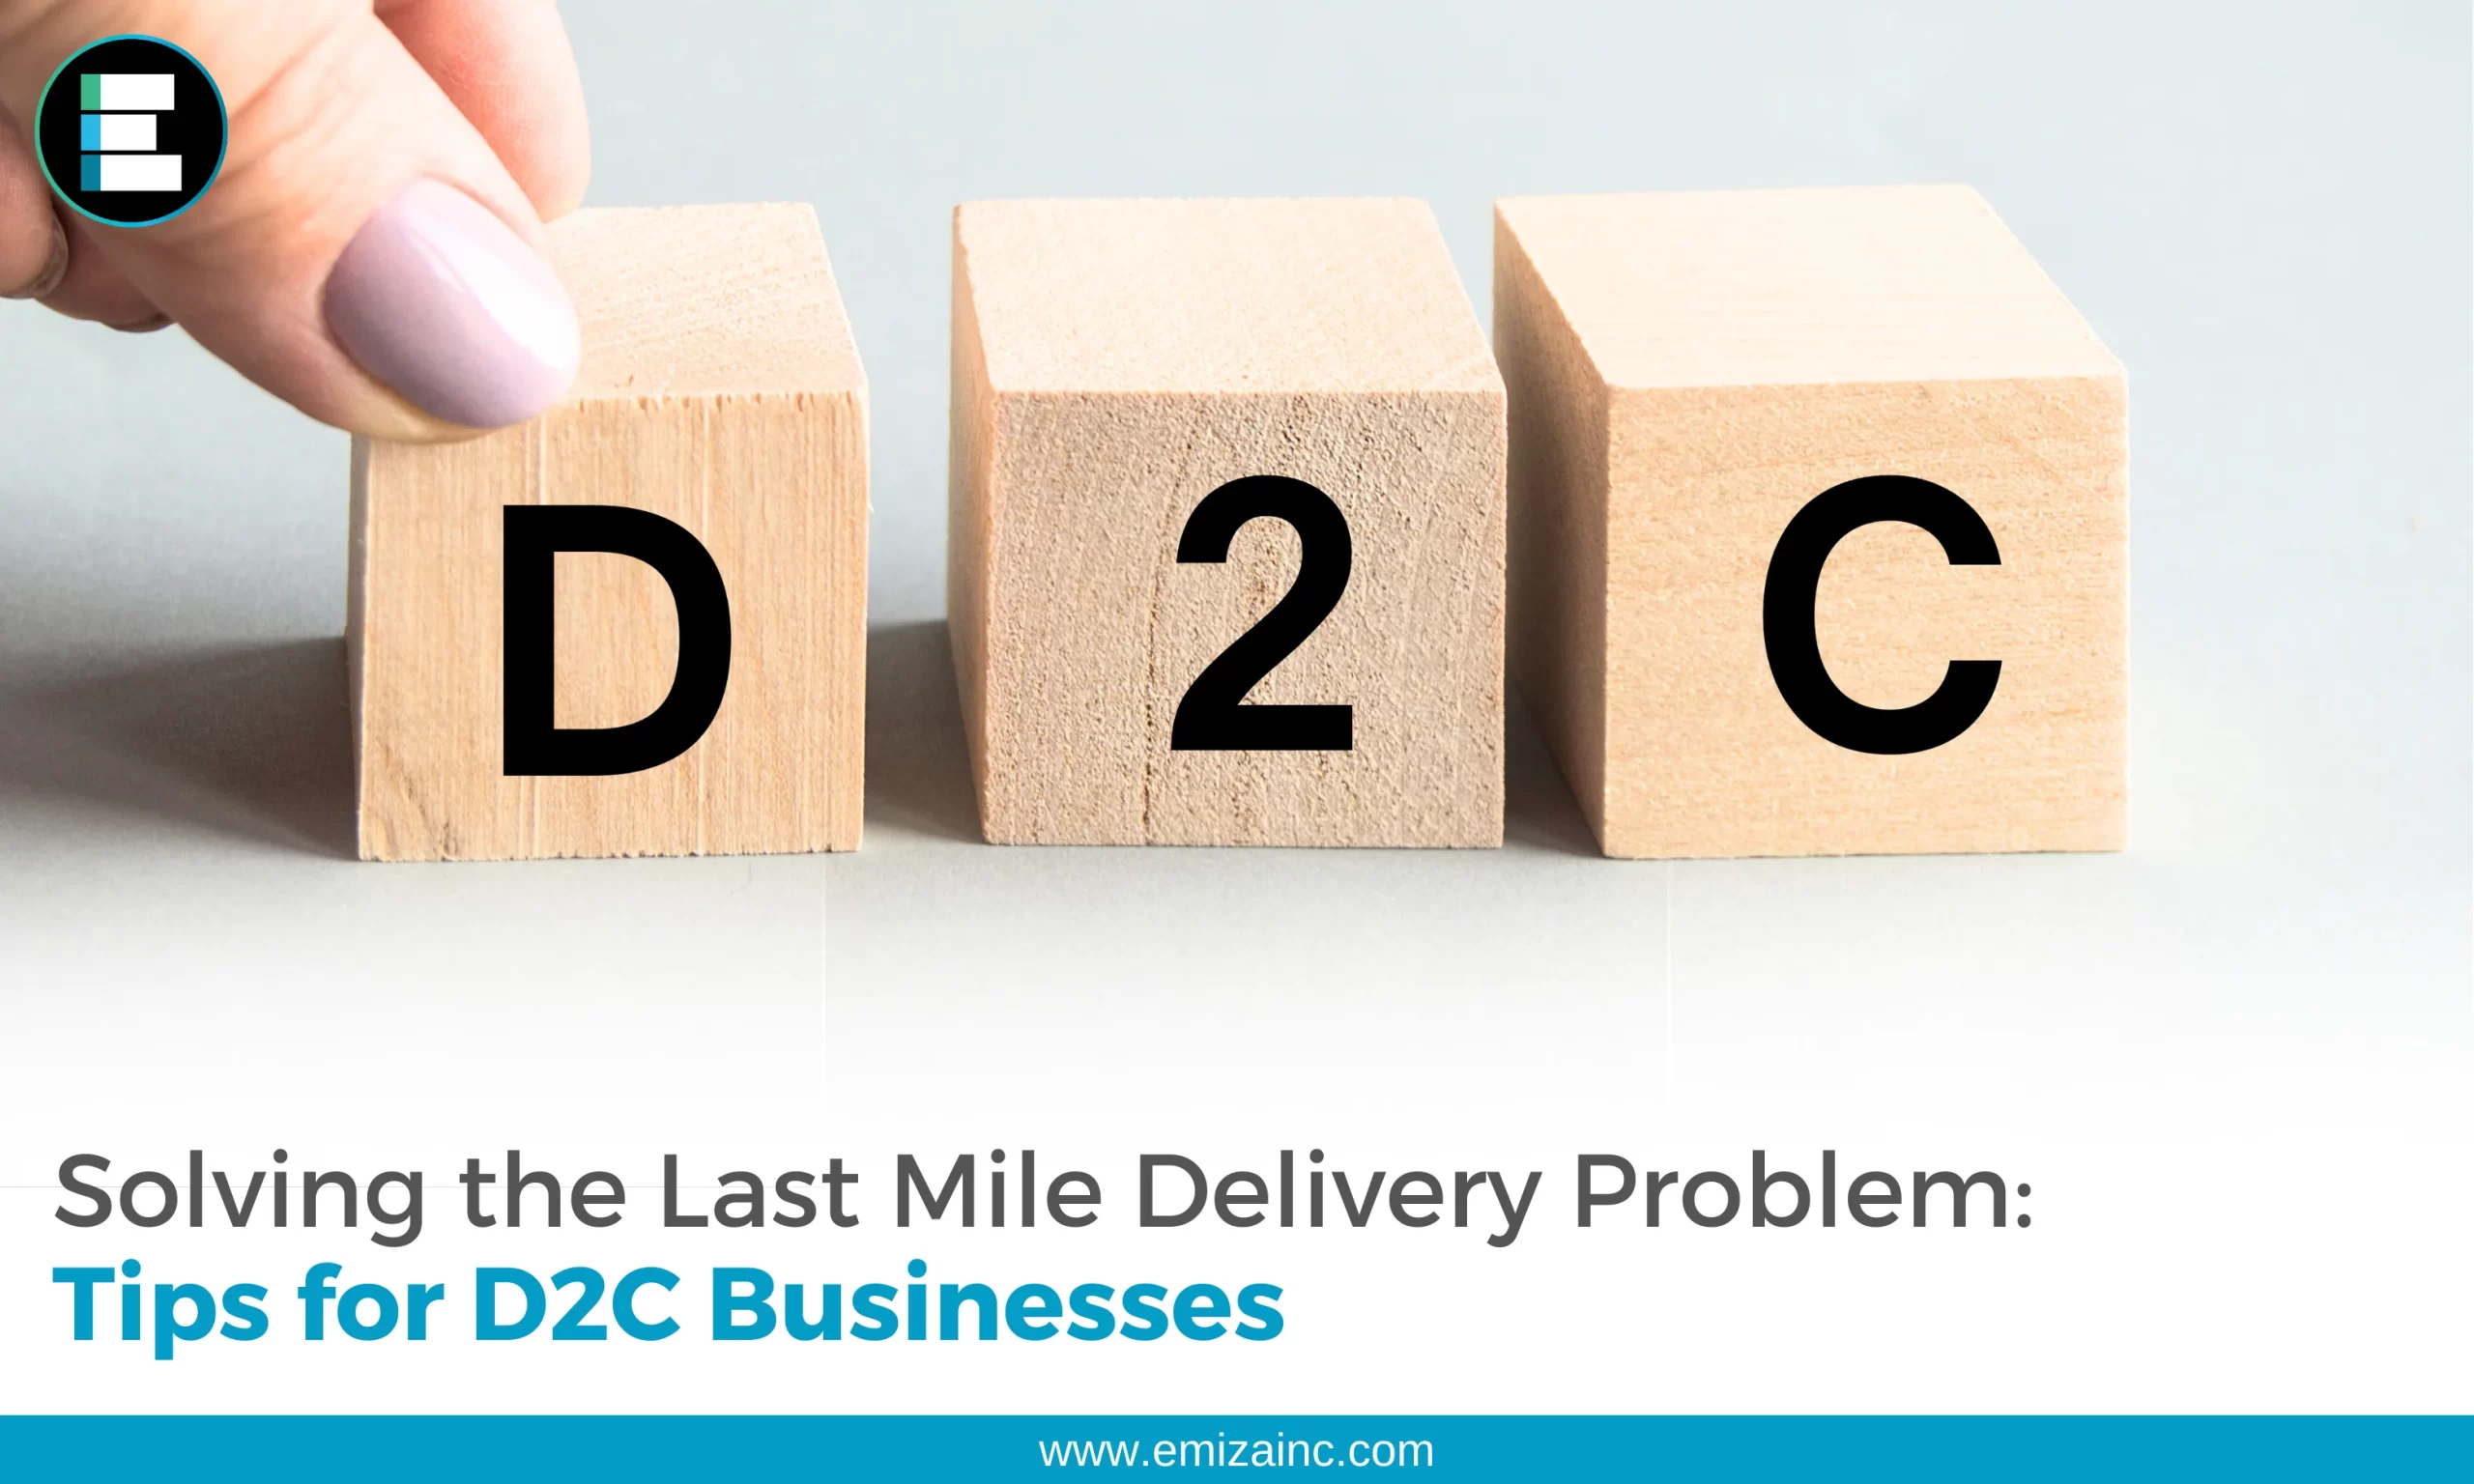 Solving the Last Mile Delivery Problem: Tips for D2C Businesses